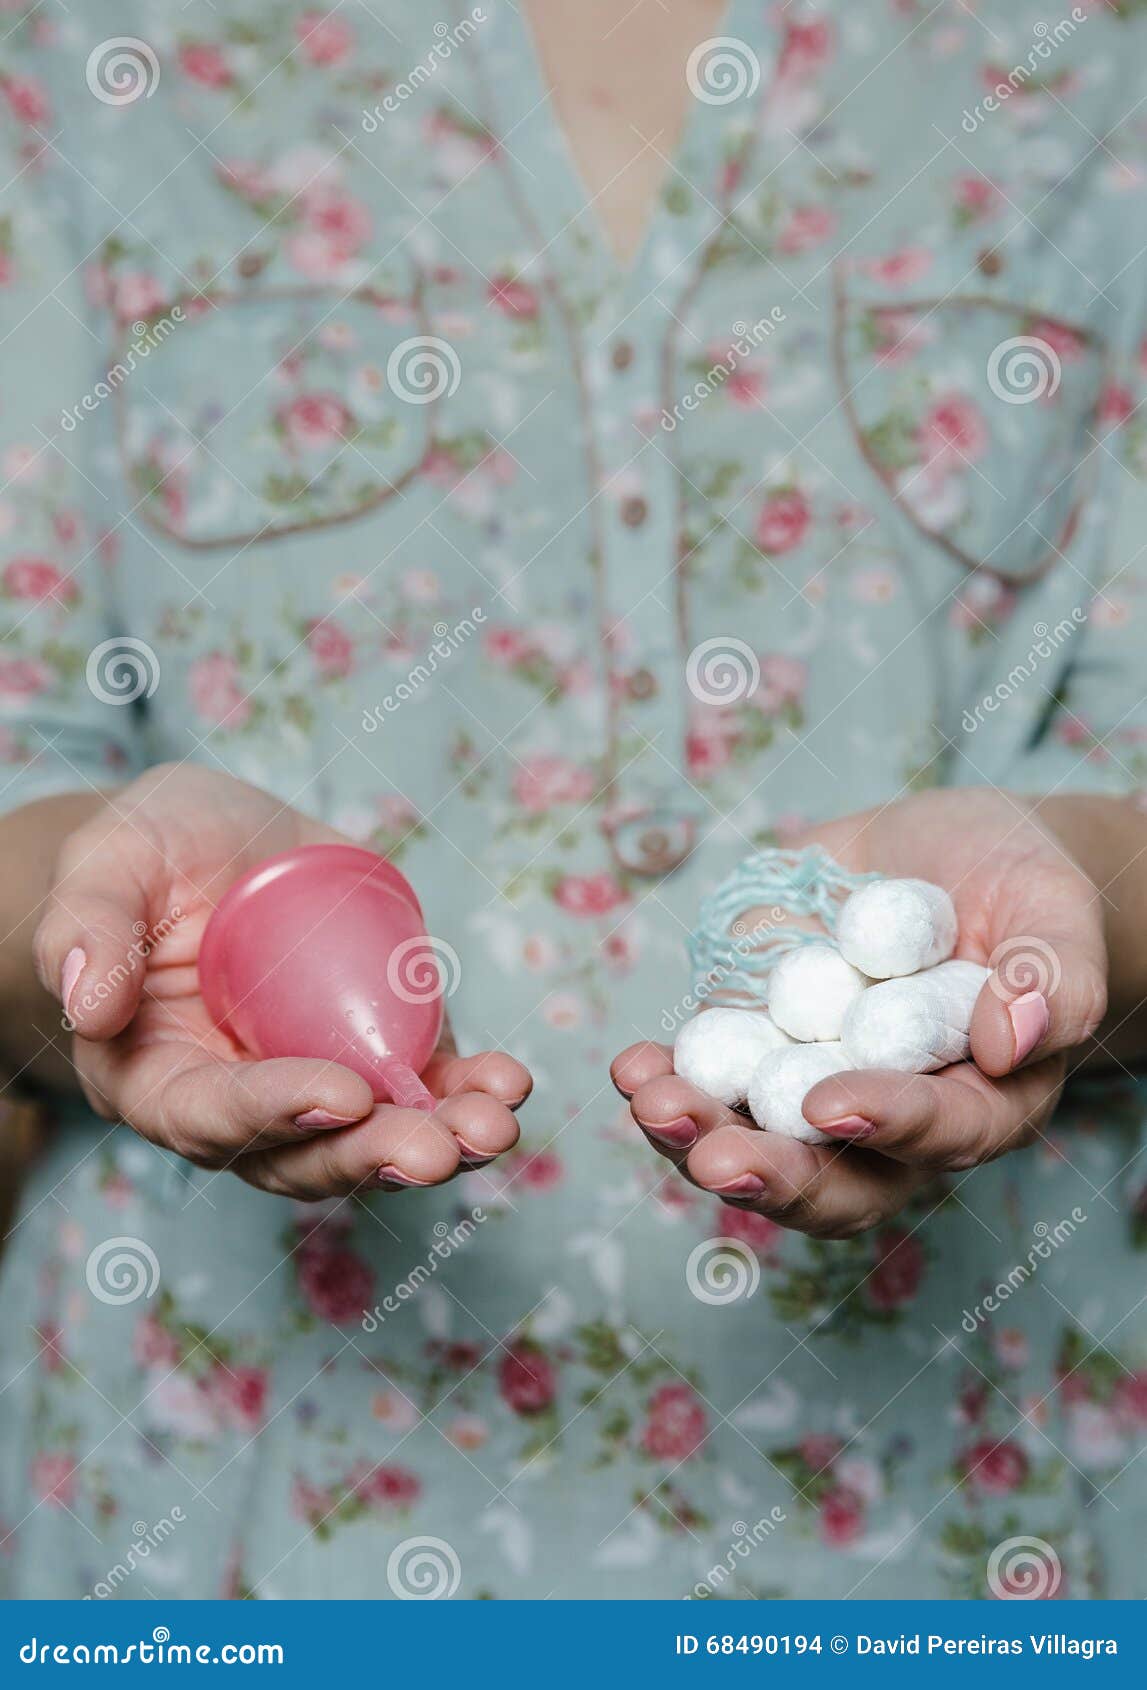 woman holding in hands tampons and menstrual cup